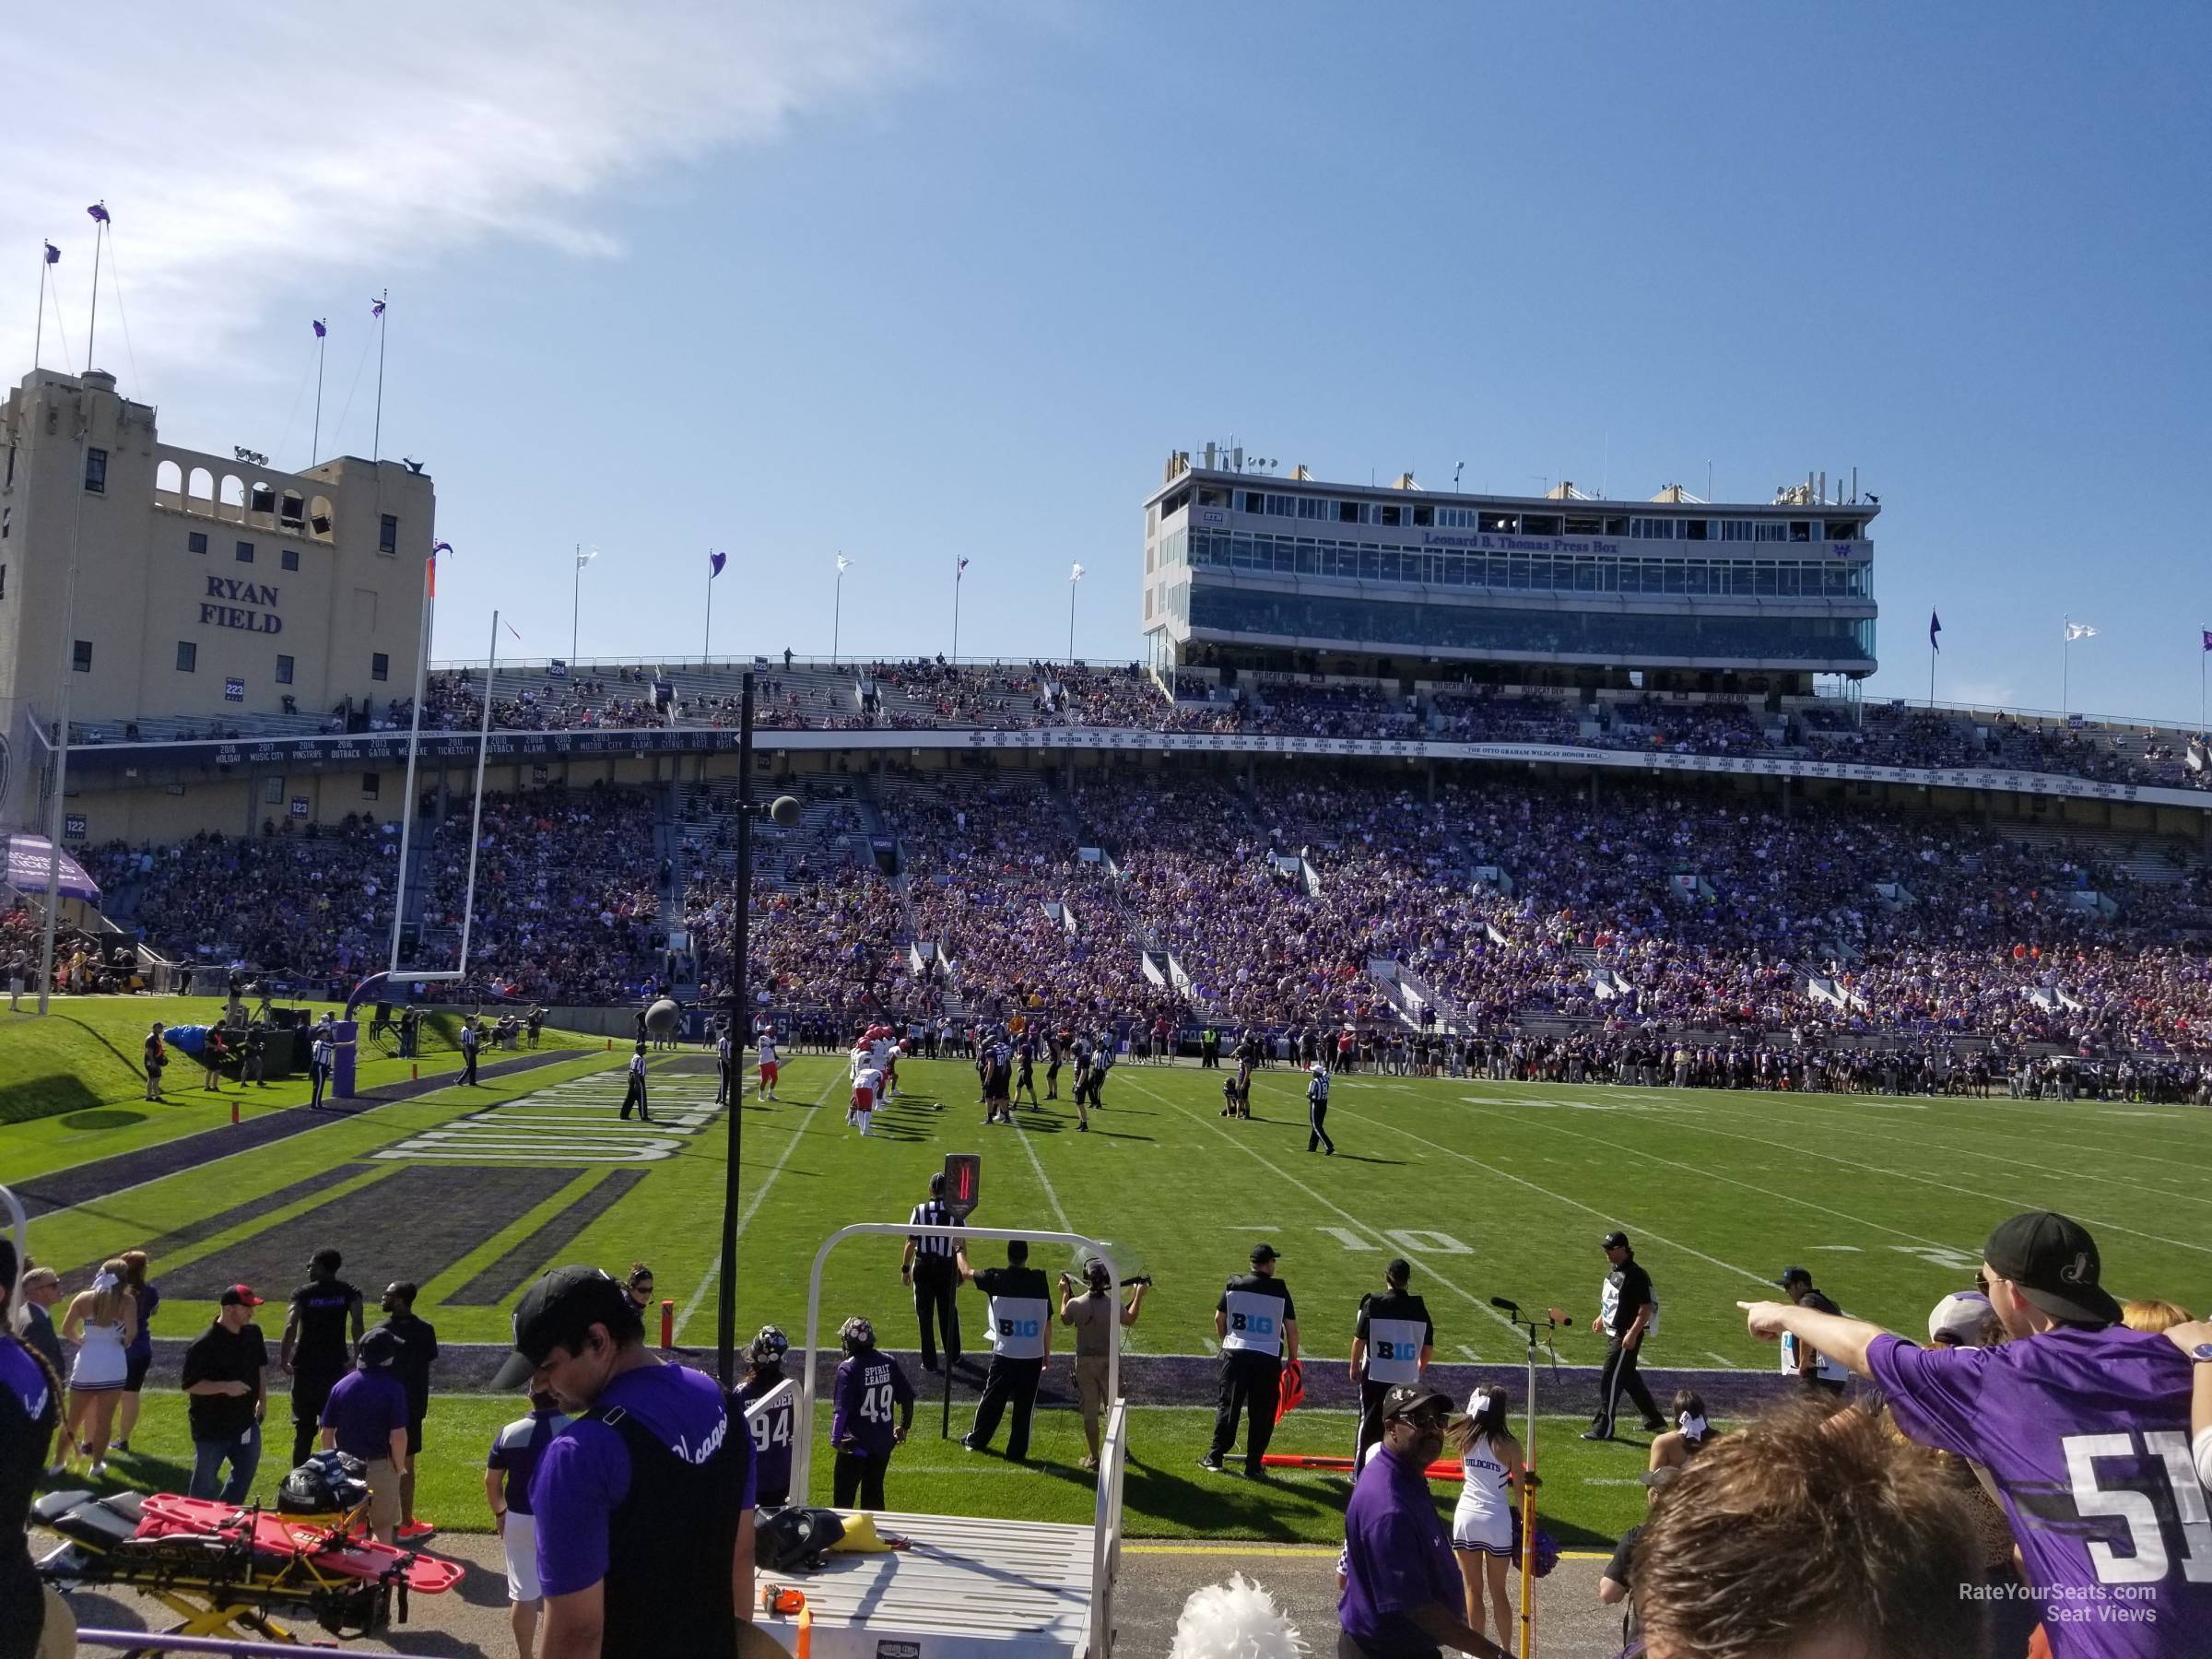 section 112, row 8 seat view  - ryan field